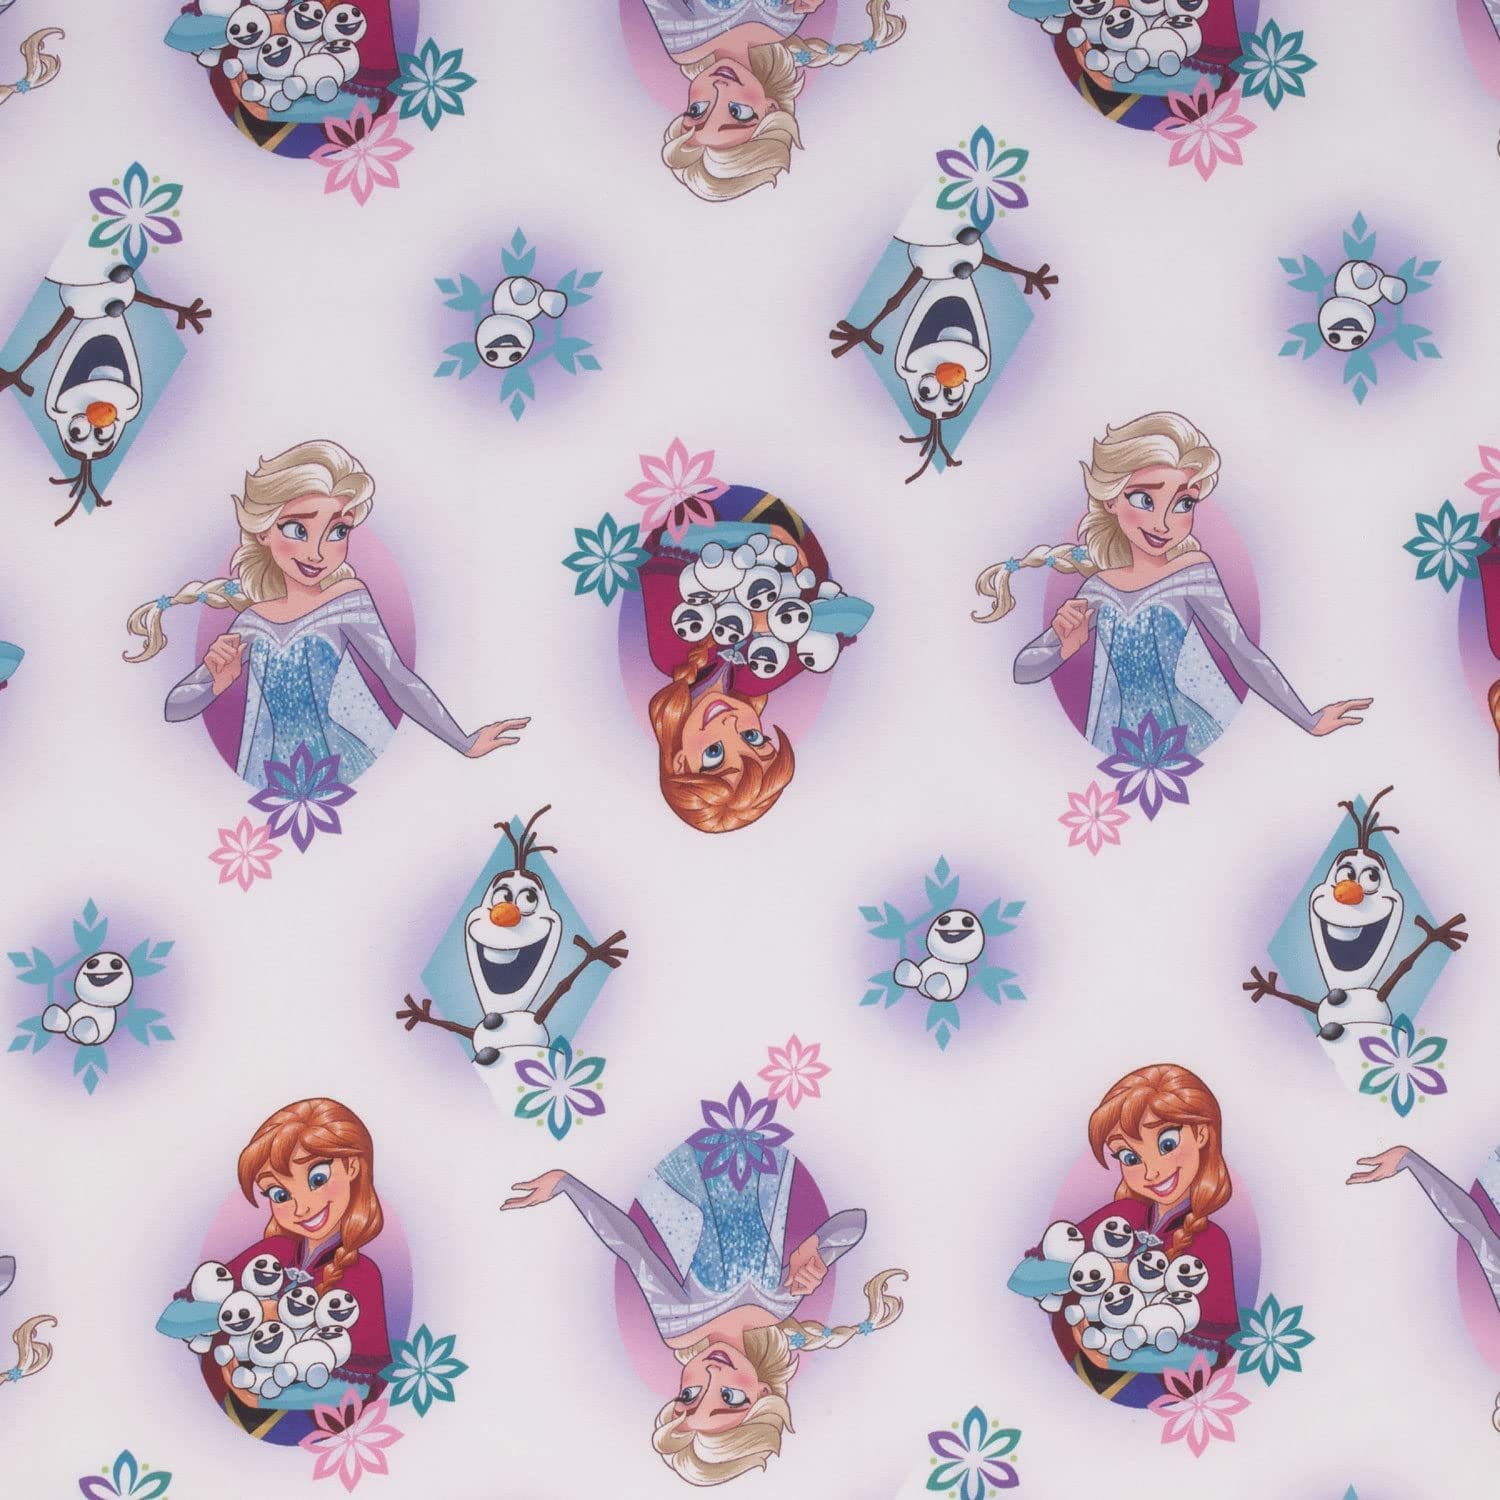 Disney Frozen Fitted Crib Sheet 100% Soft Microfiber, Baby Sheet, Fits Standard Size Crib Mattress 28in x 52in - image 4 of 4